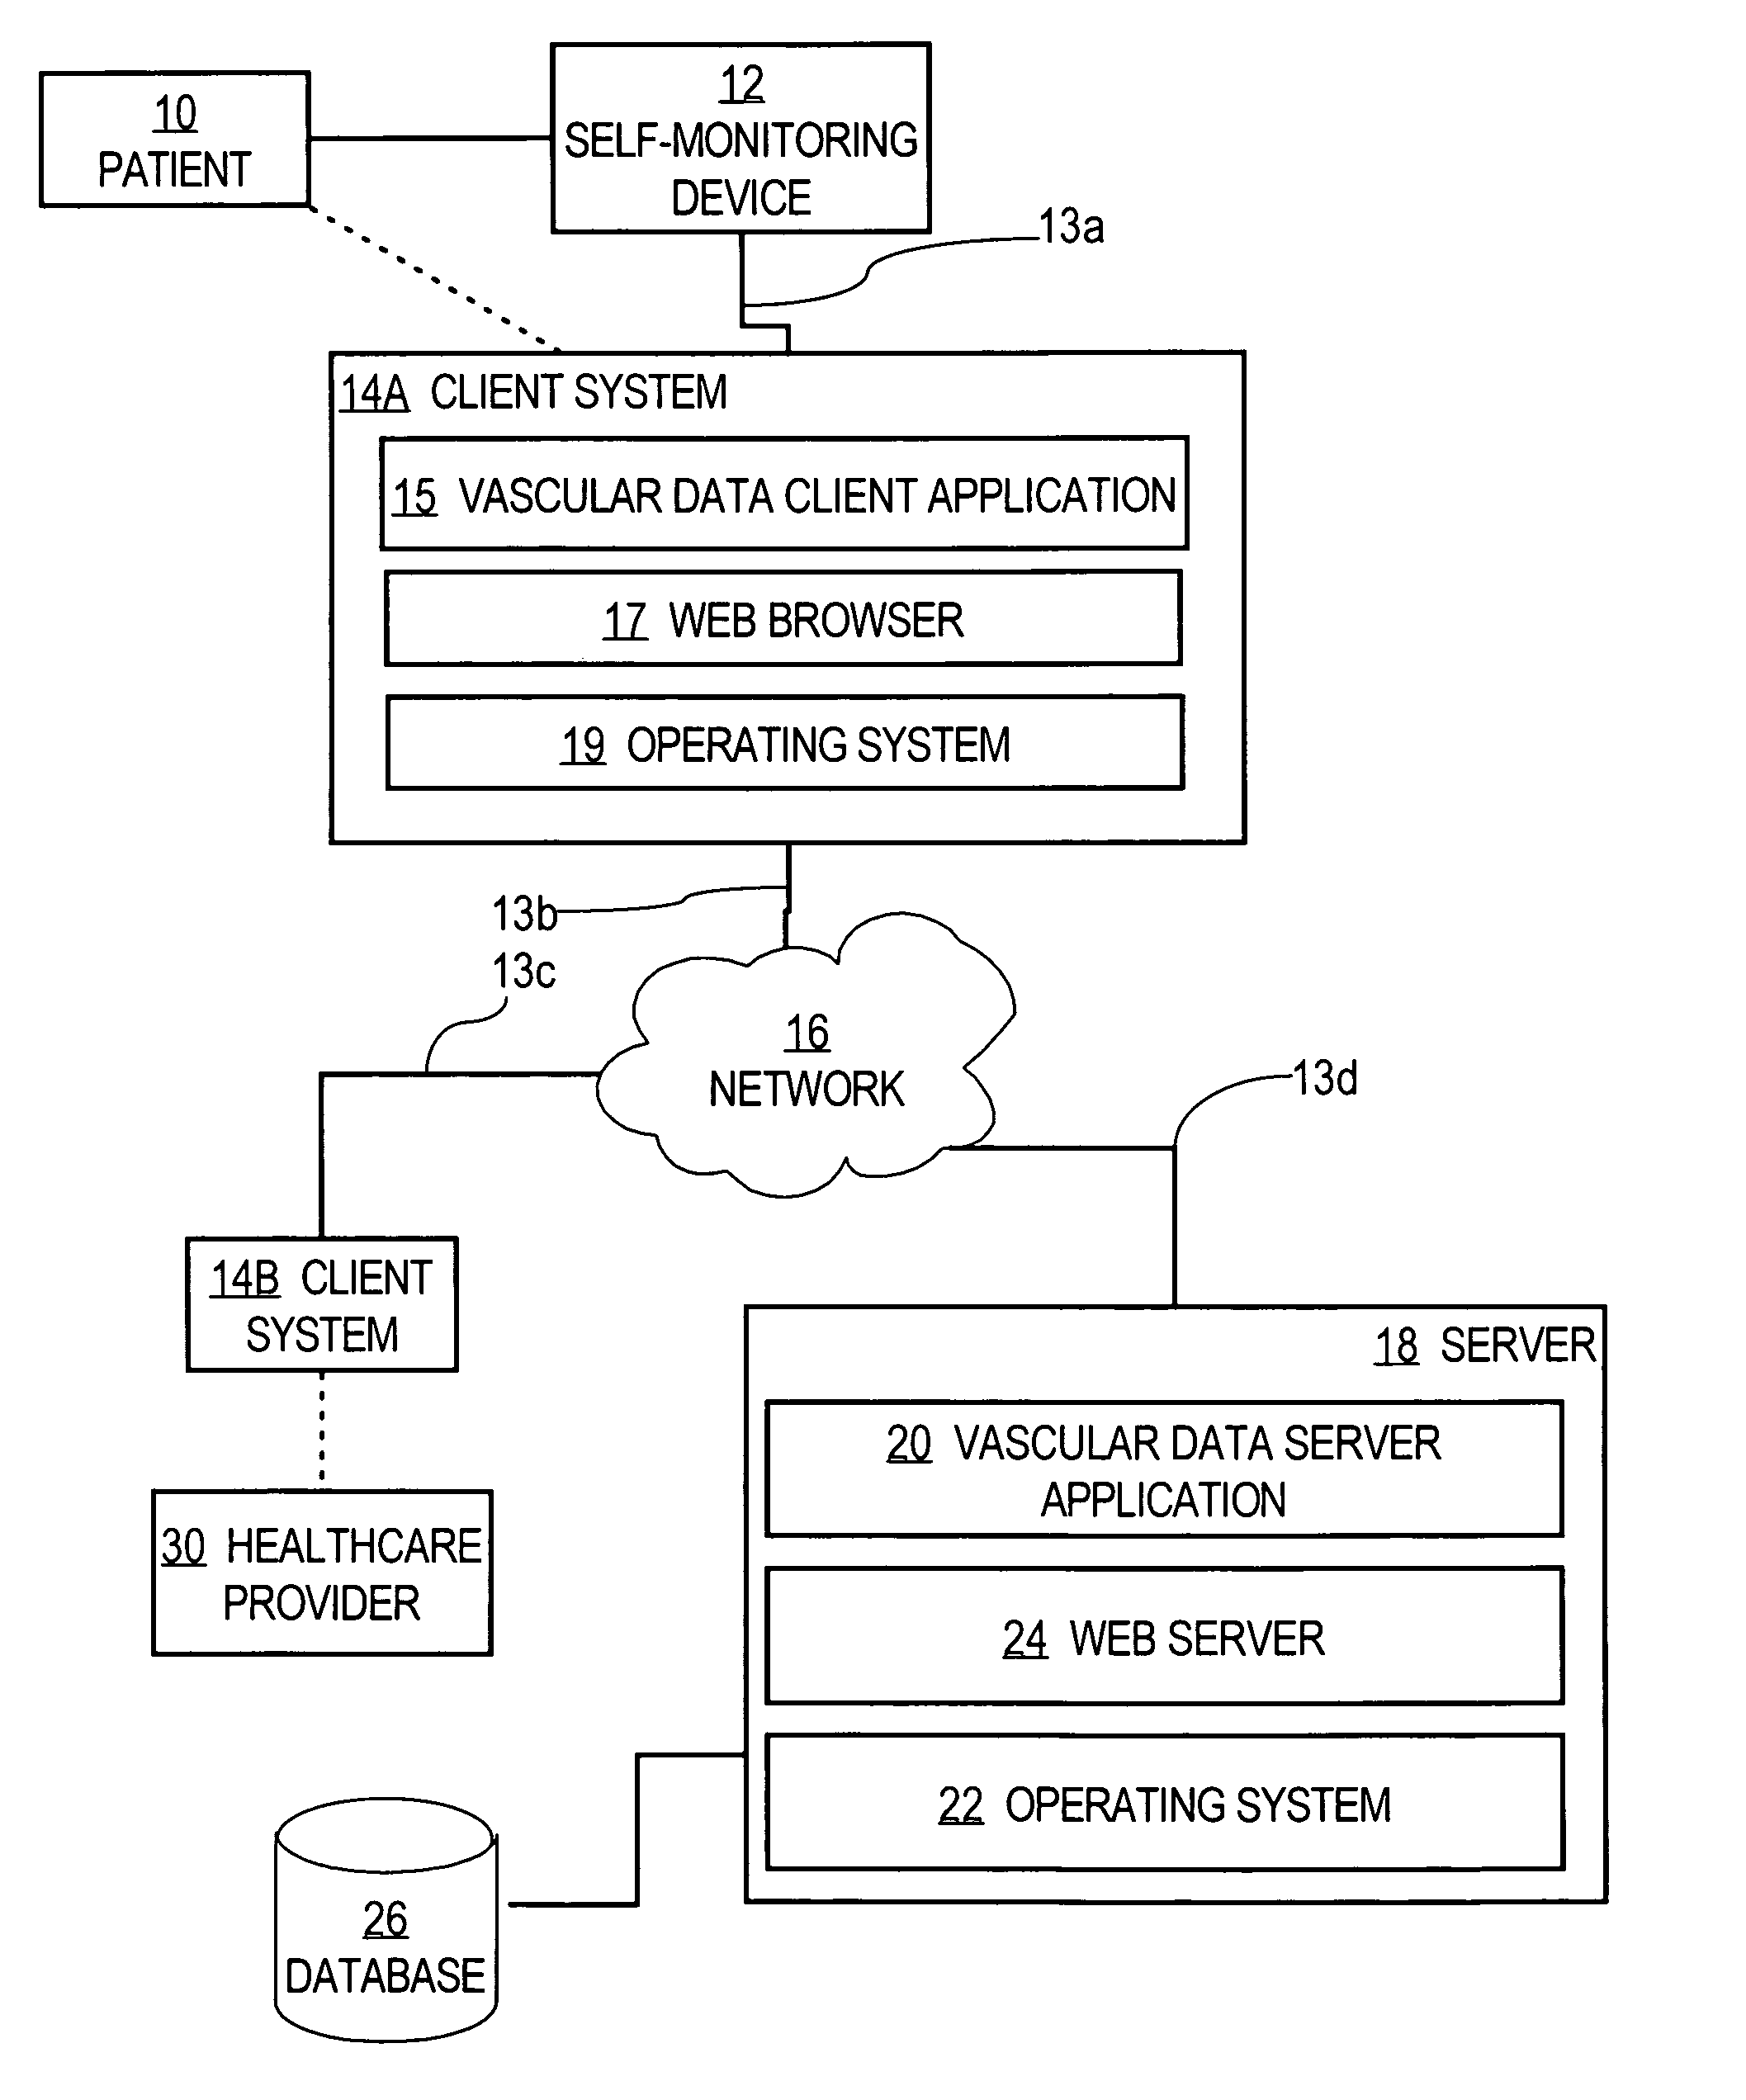 System for improving vascular systems in humans using biofeedback and network data communication